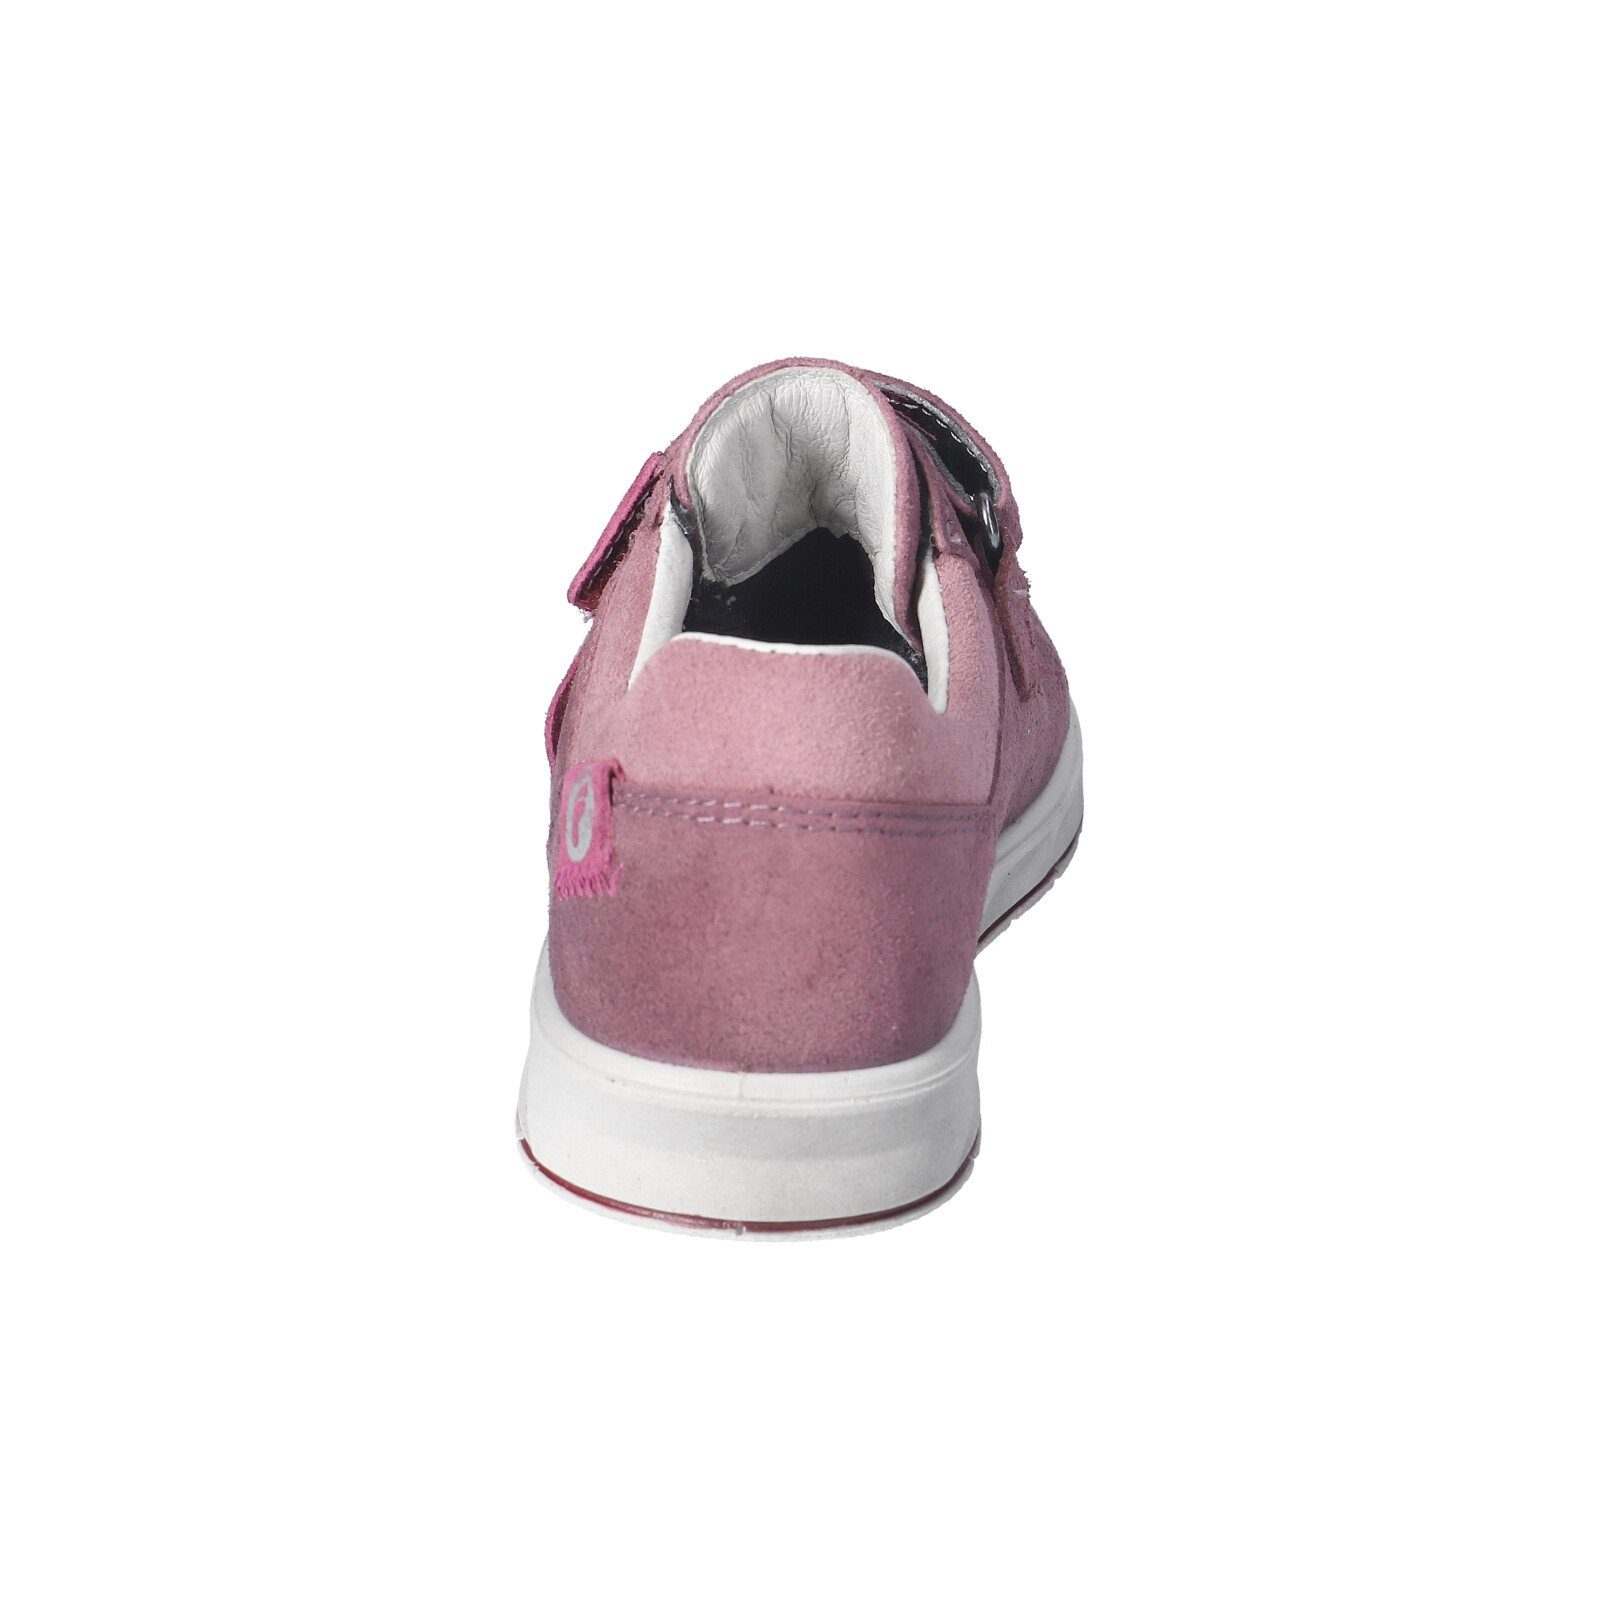 pflaume/sucre Sneaker (370) Ricosta